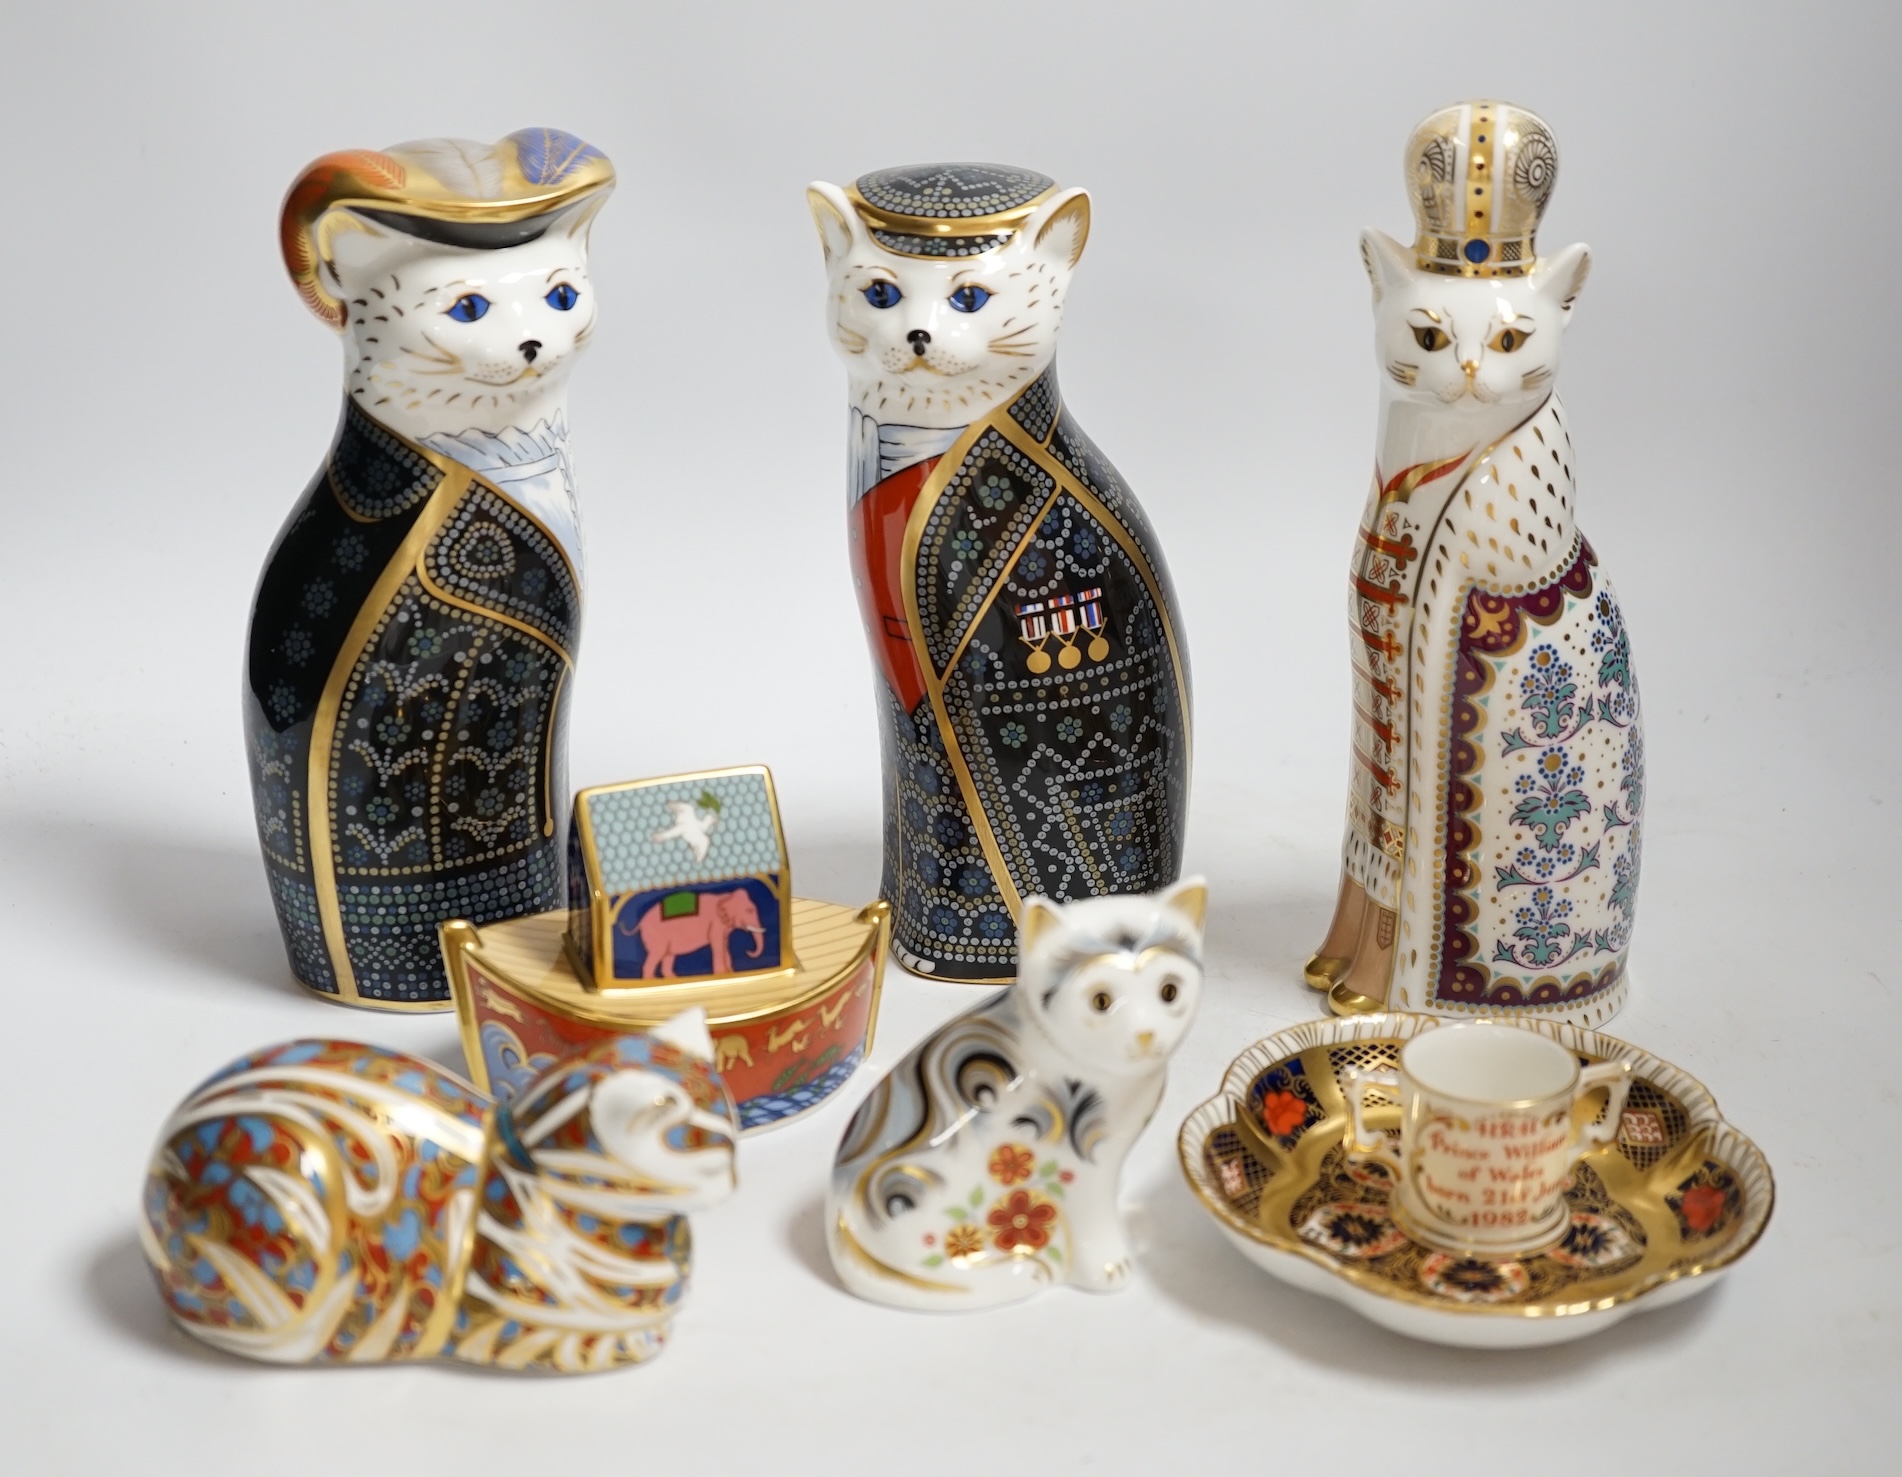 A collection of Royal Crown Derby porcelain and paperweights including Pearly Queen, Pearly King, Russian, etc.